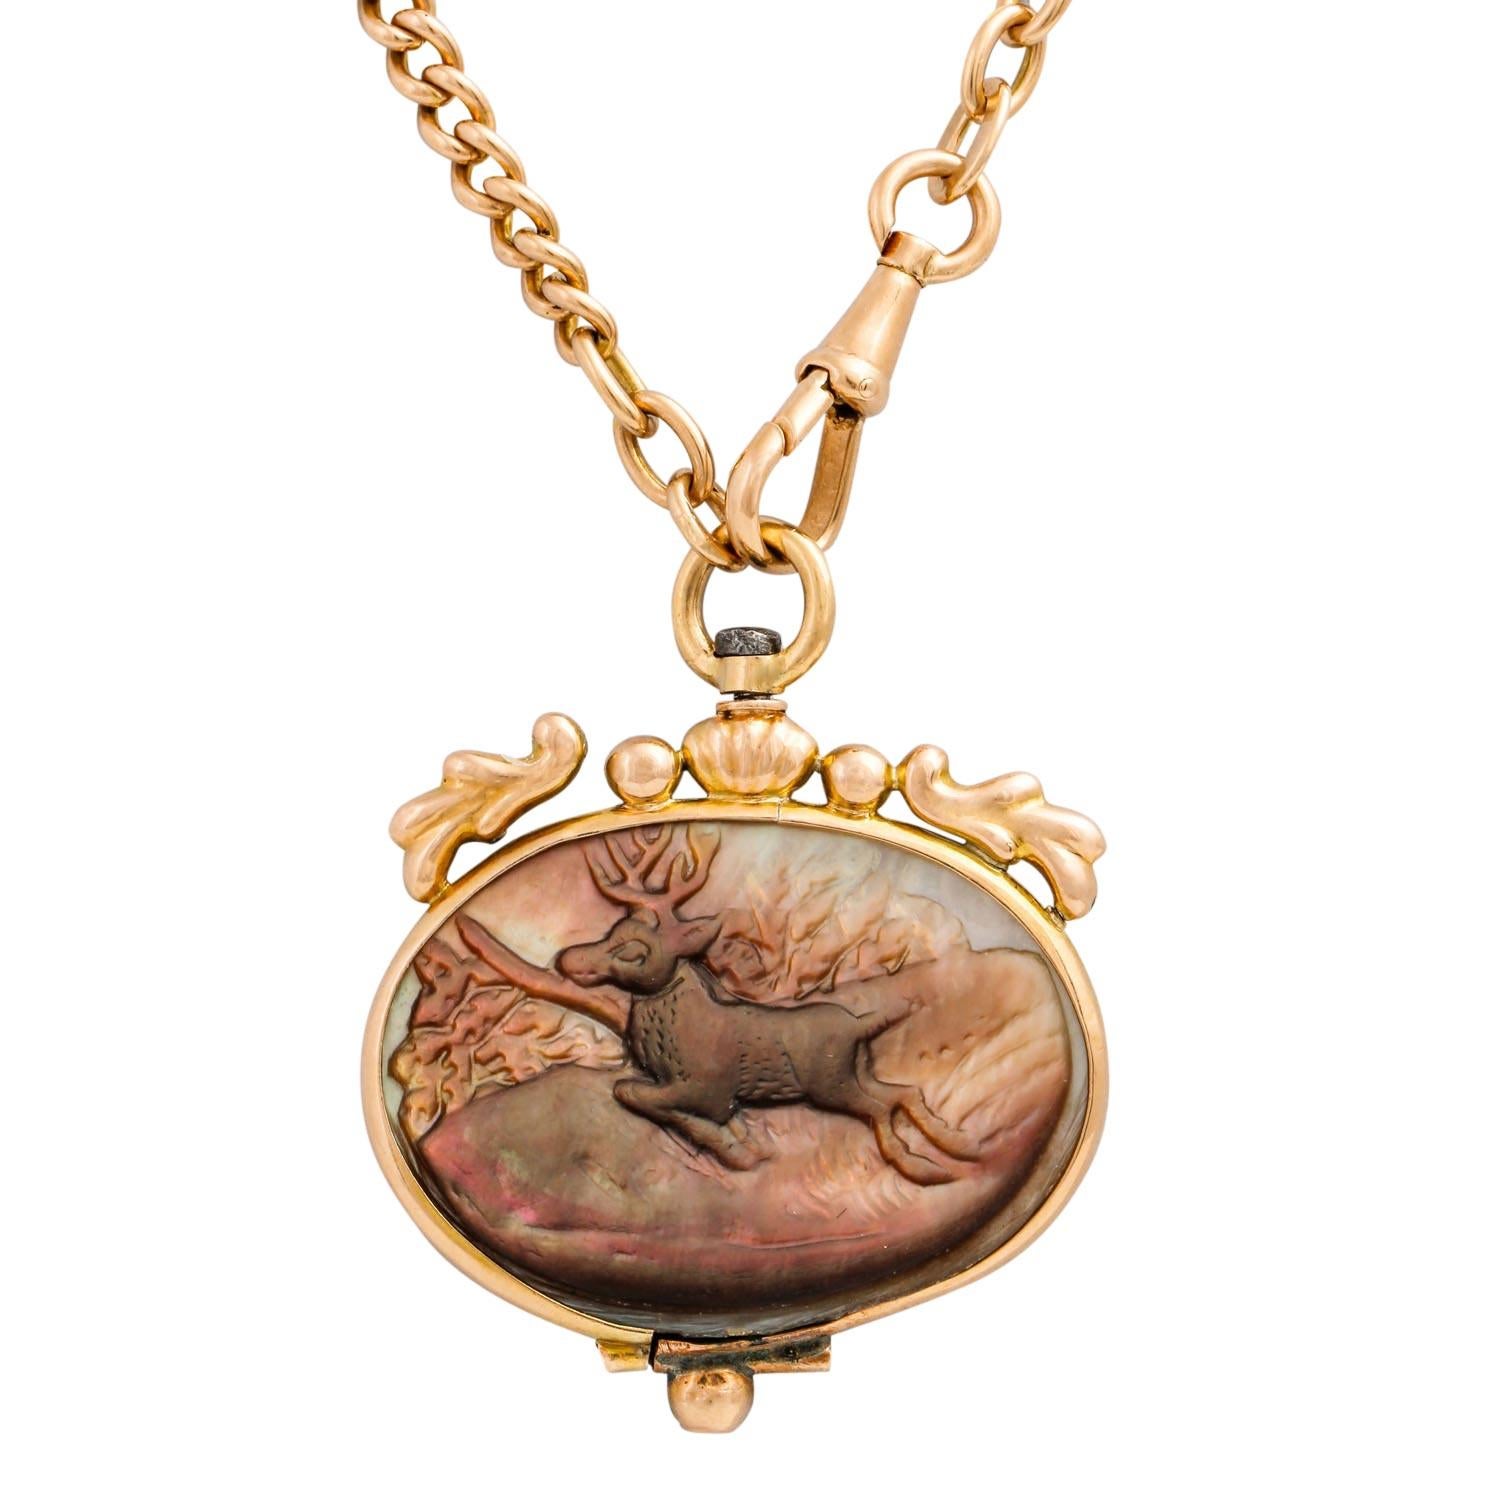 Necklace and pendant made of mother-of-pearl with a carved hunting scene, set in RG 14K, 23.6 g, chain length approx. 44 cm, 1st half of the 20th century, slight signs of wear.

Necklace and pendant with mother-of- pearl with engraved hunting scene,